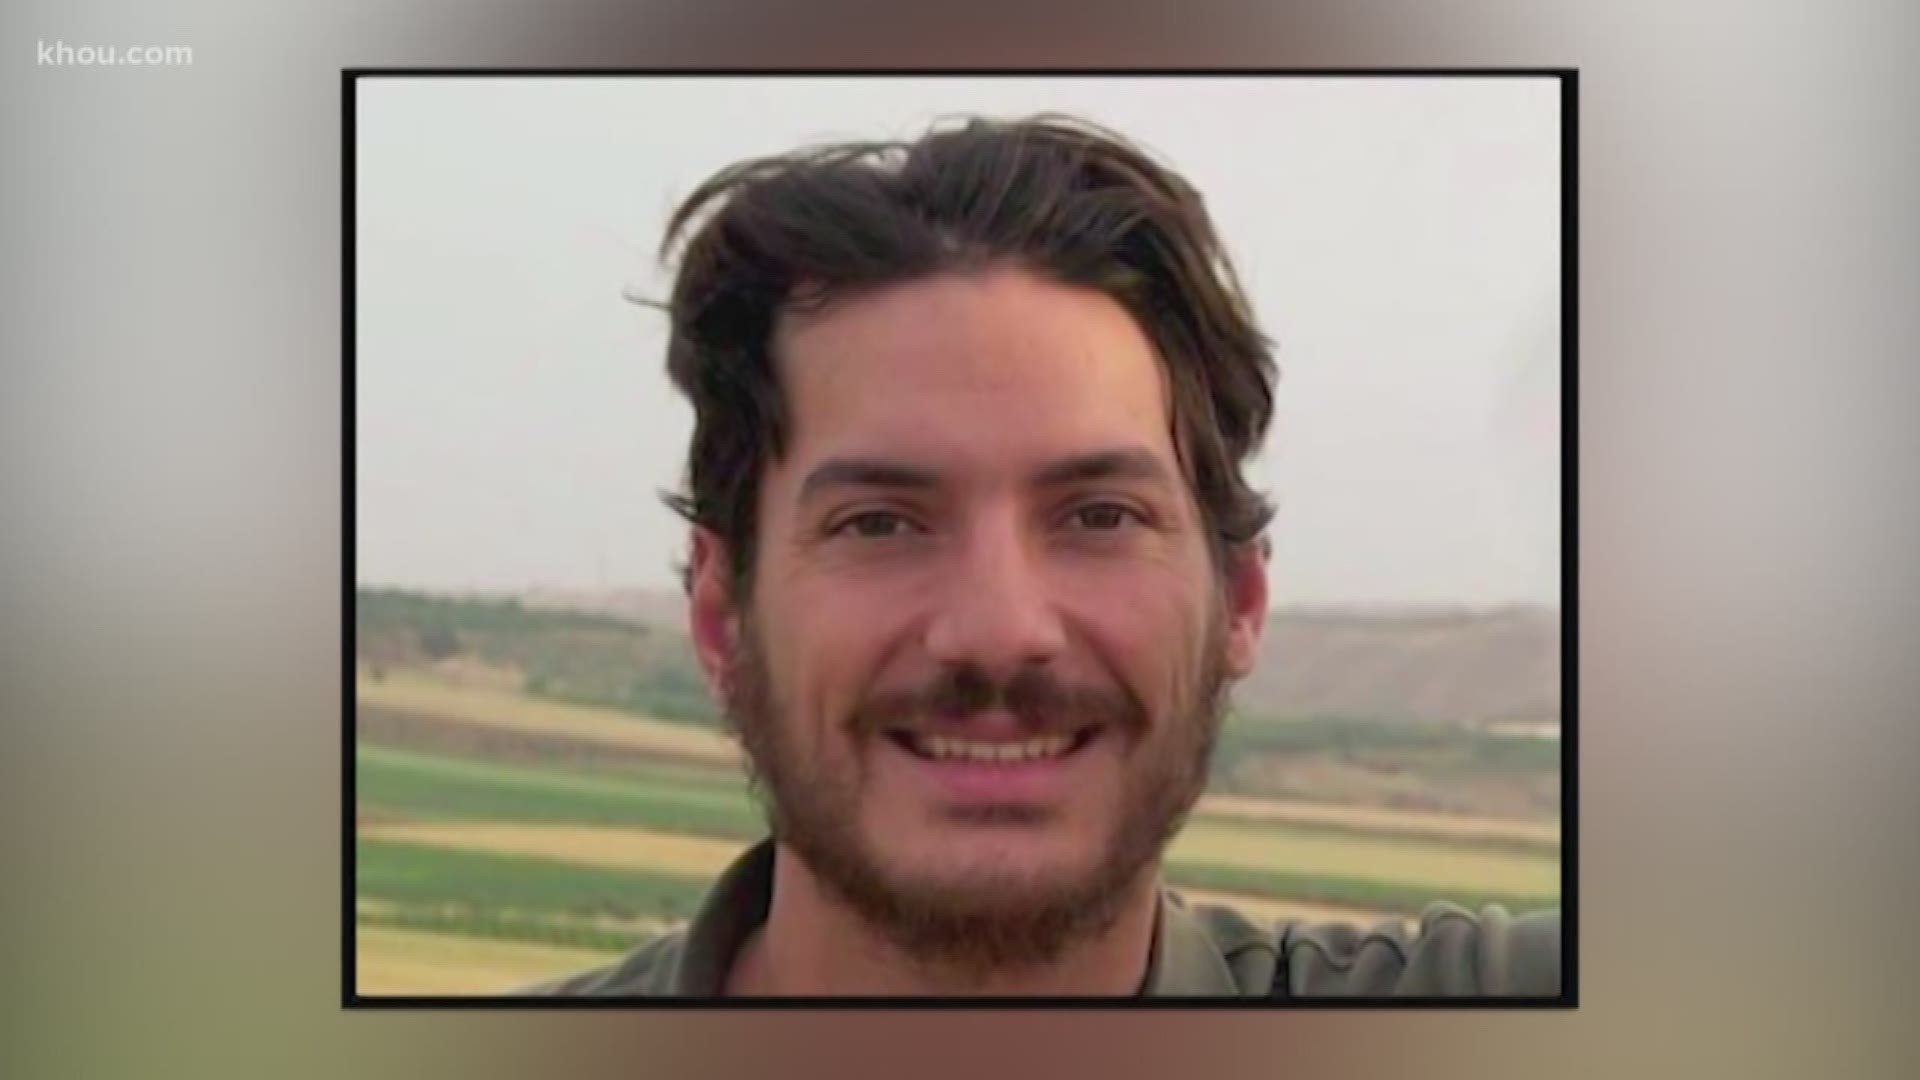 Several businesses across the country banded together Thursday to raise awareness and money with hopes of bringing journalist Austin Tice home.